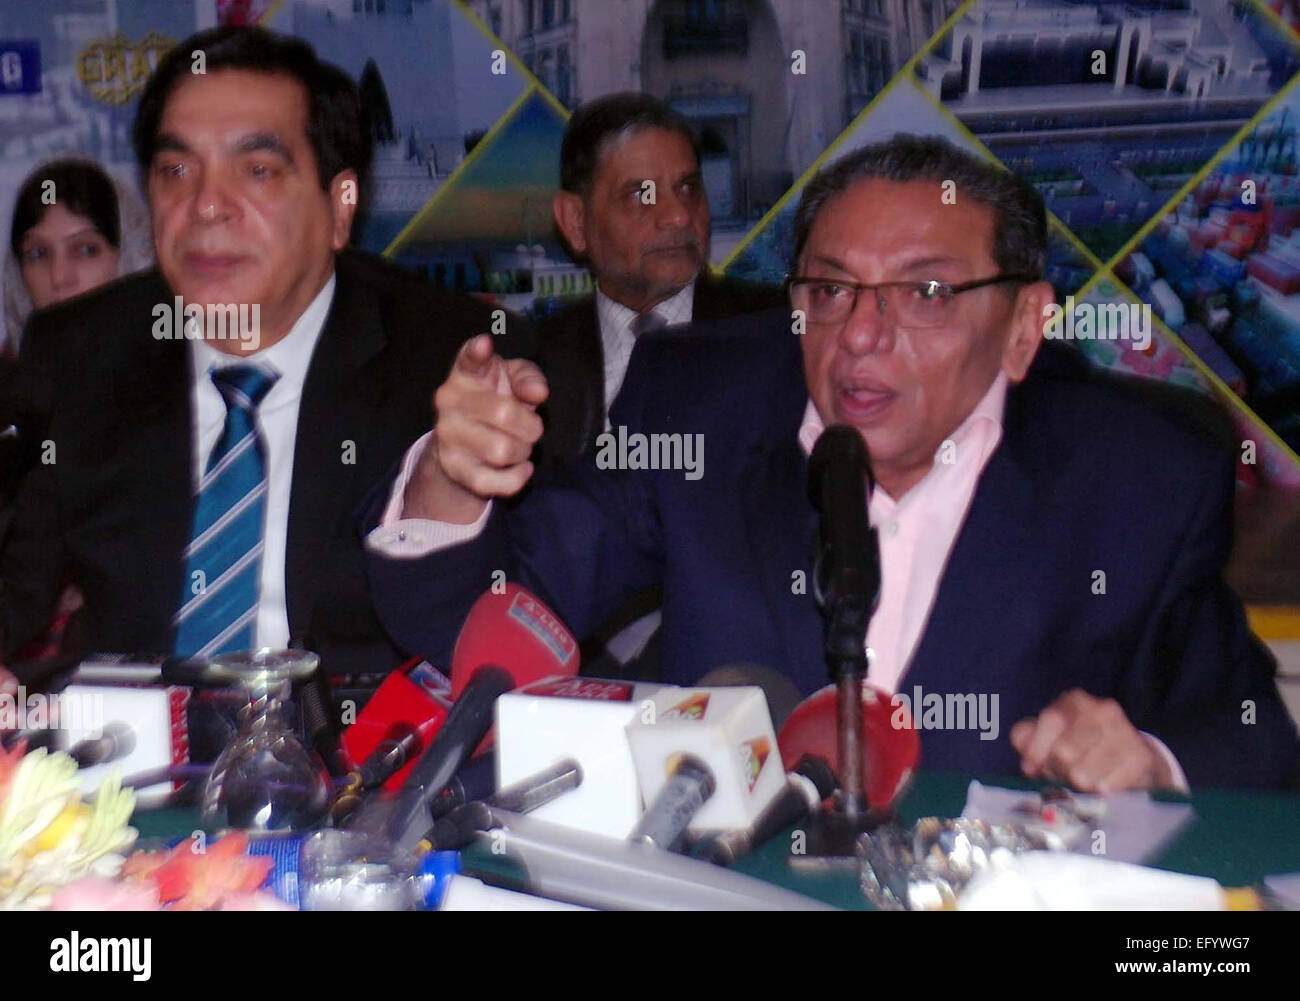 Chairman of Businessmen Group Former, Siraj Kasam Teli is addressing to media persons during a press conference held at Karachi Chambers of Commerce on Thursday, February 12, 2015. Stock Photo